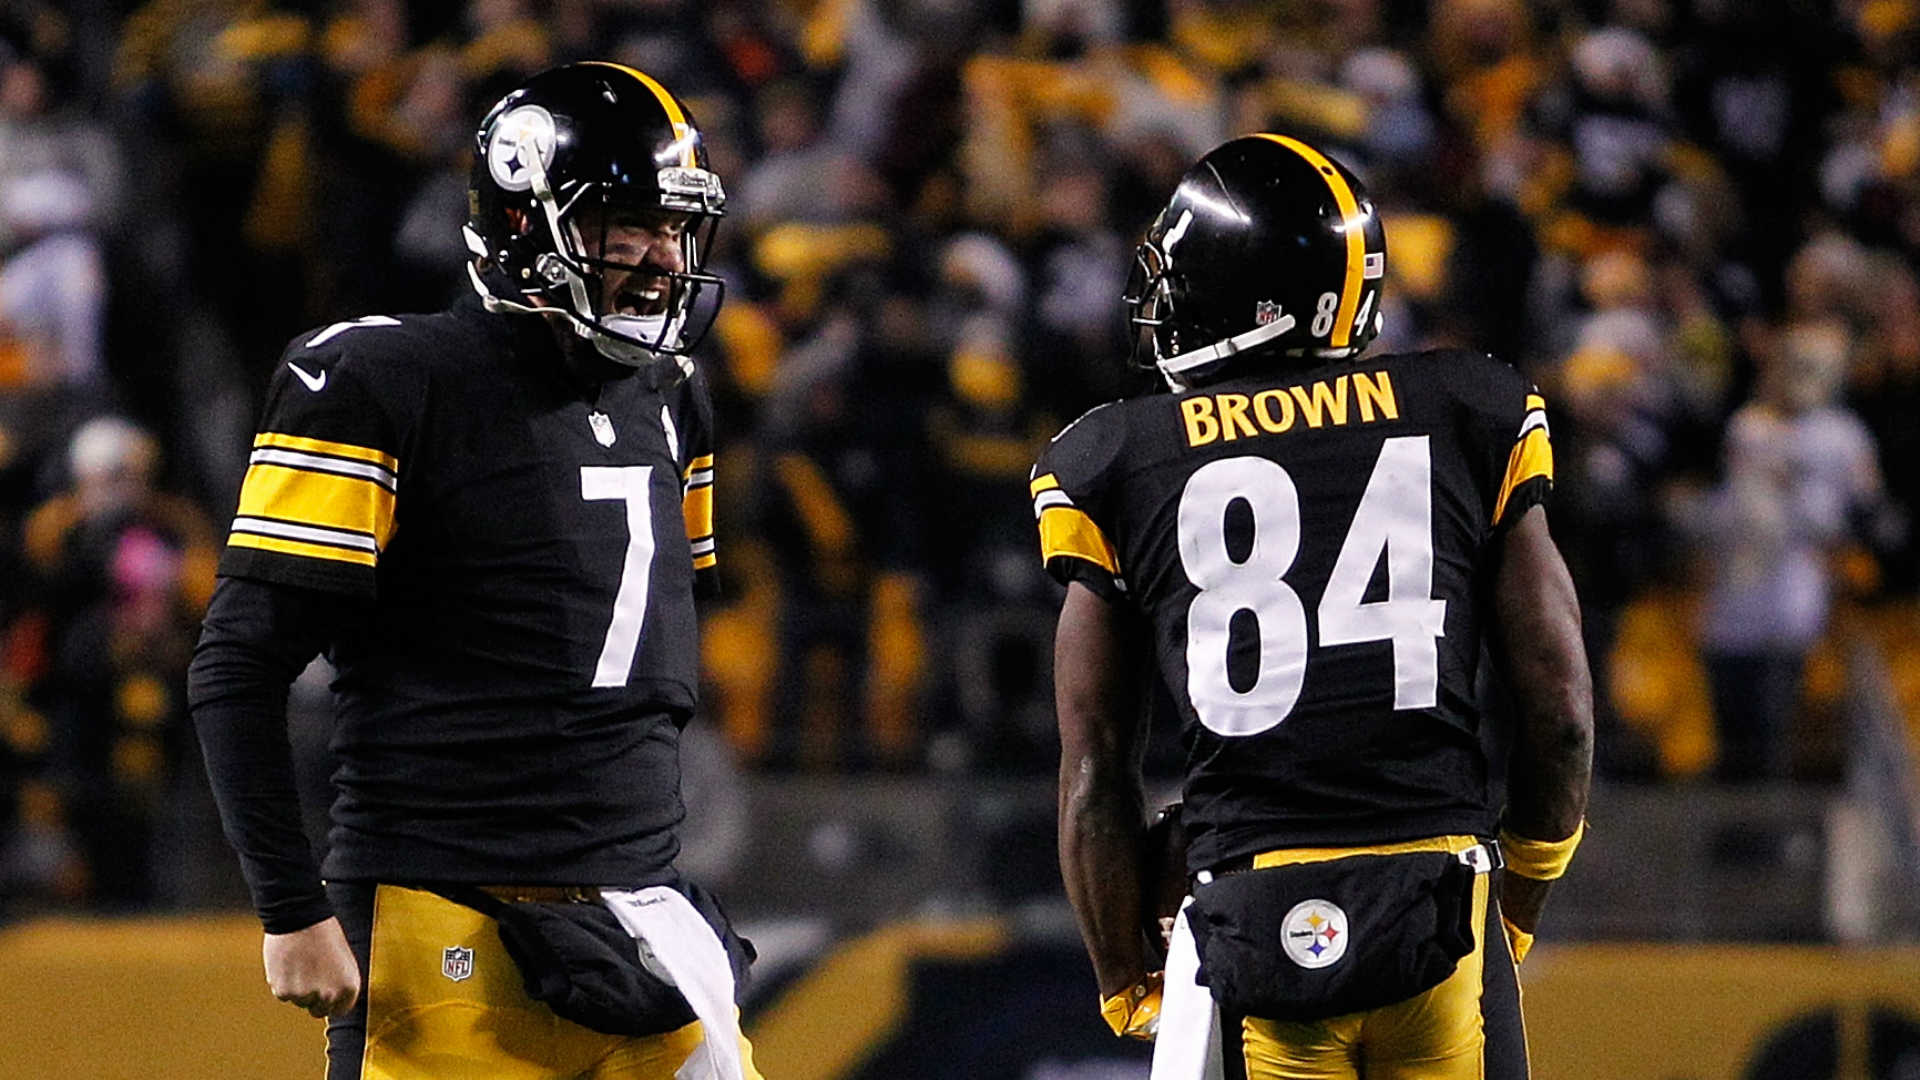 NFL's best offense plays in Pittsburgh, just as Ben Roethlisberger